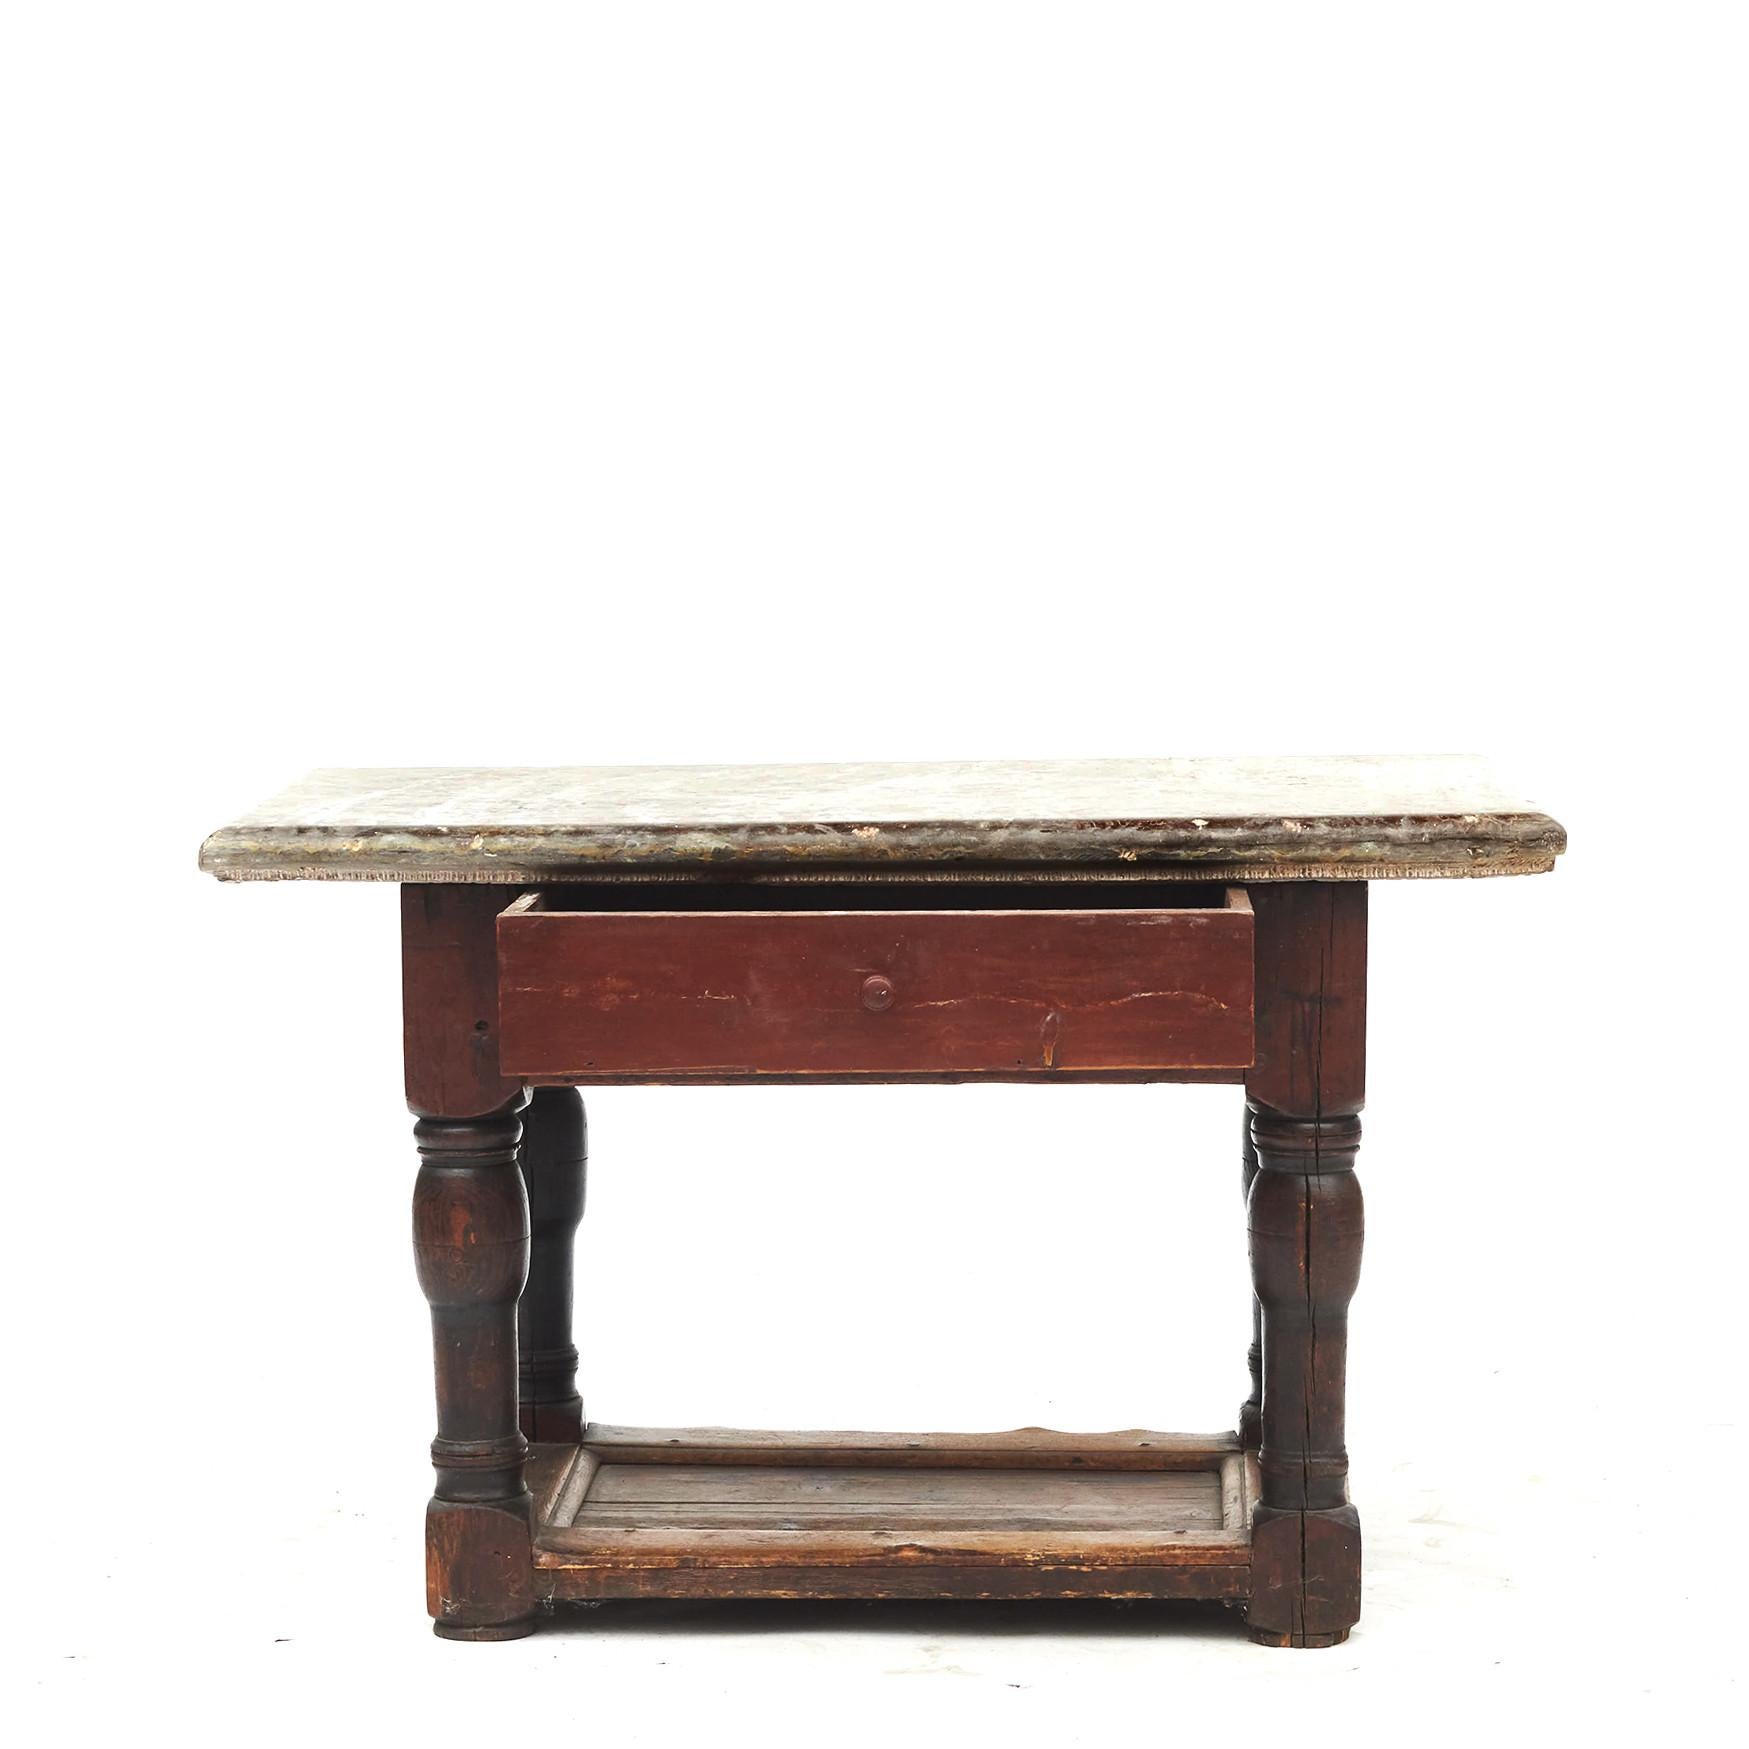 Swedish Baroque table. Original red painted pine with age-related patina.
Öland fossil limestone top resting on a drawer and typical Baluster-shaped Baroque legs.
Sweden circa 1750-1770.
Charming table.